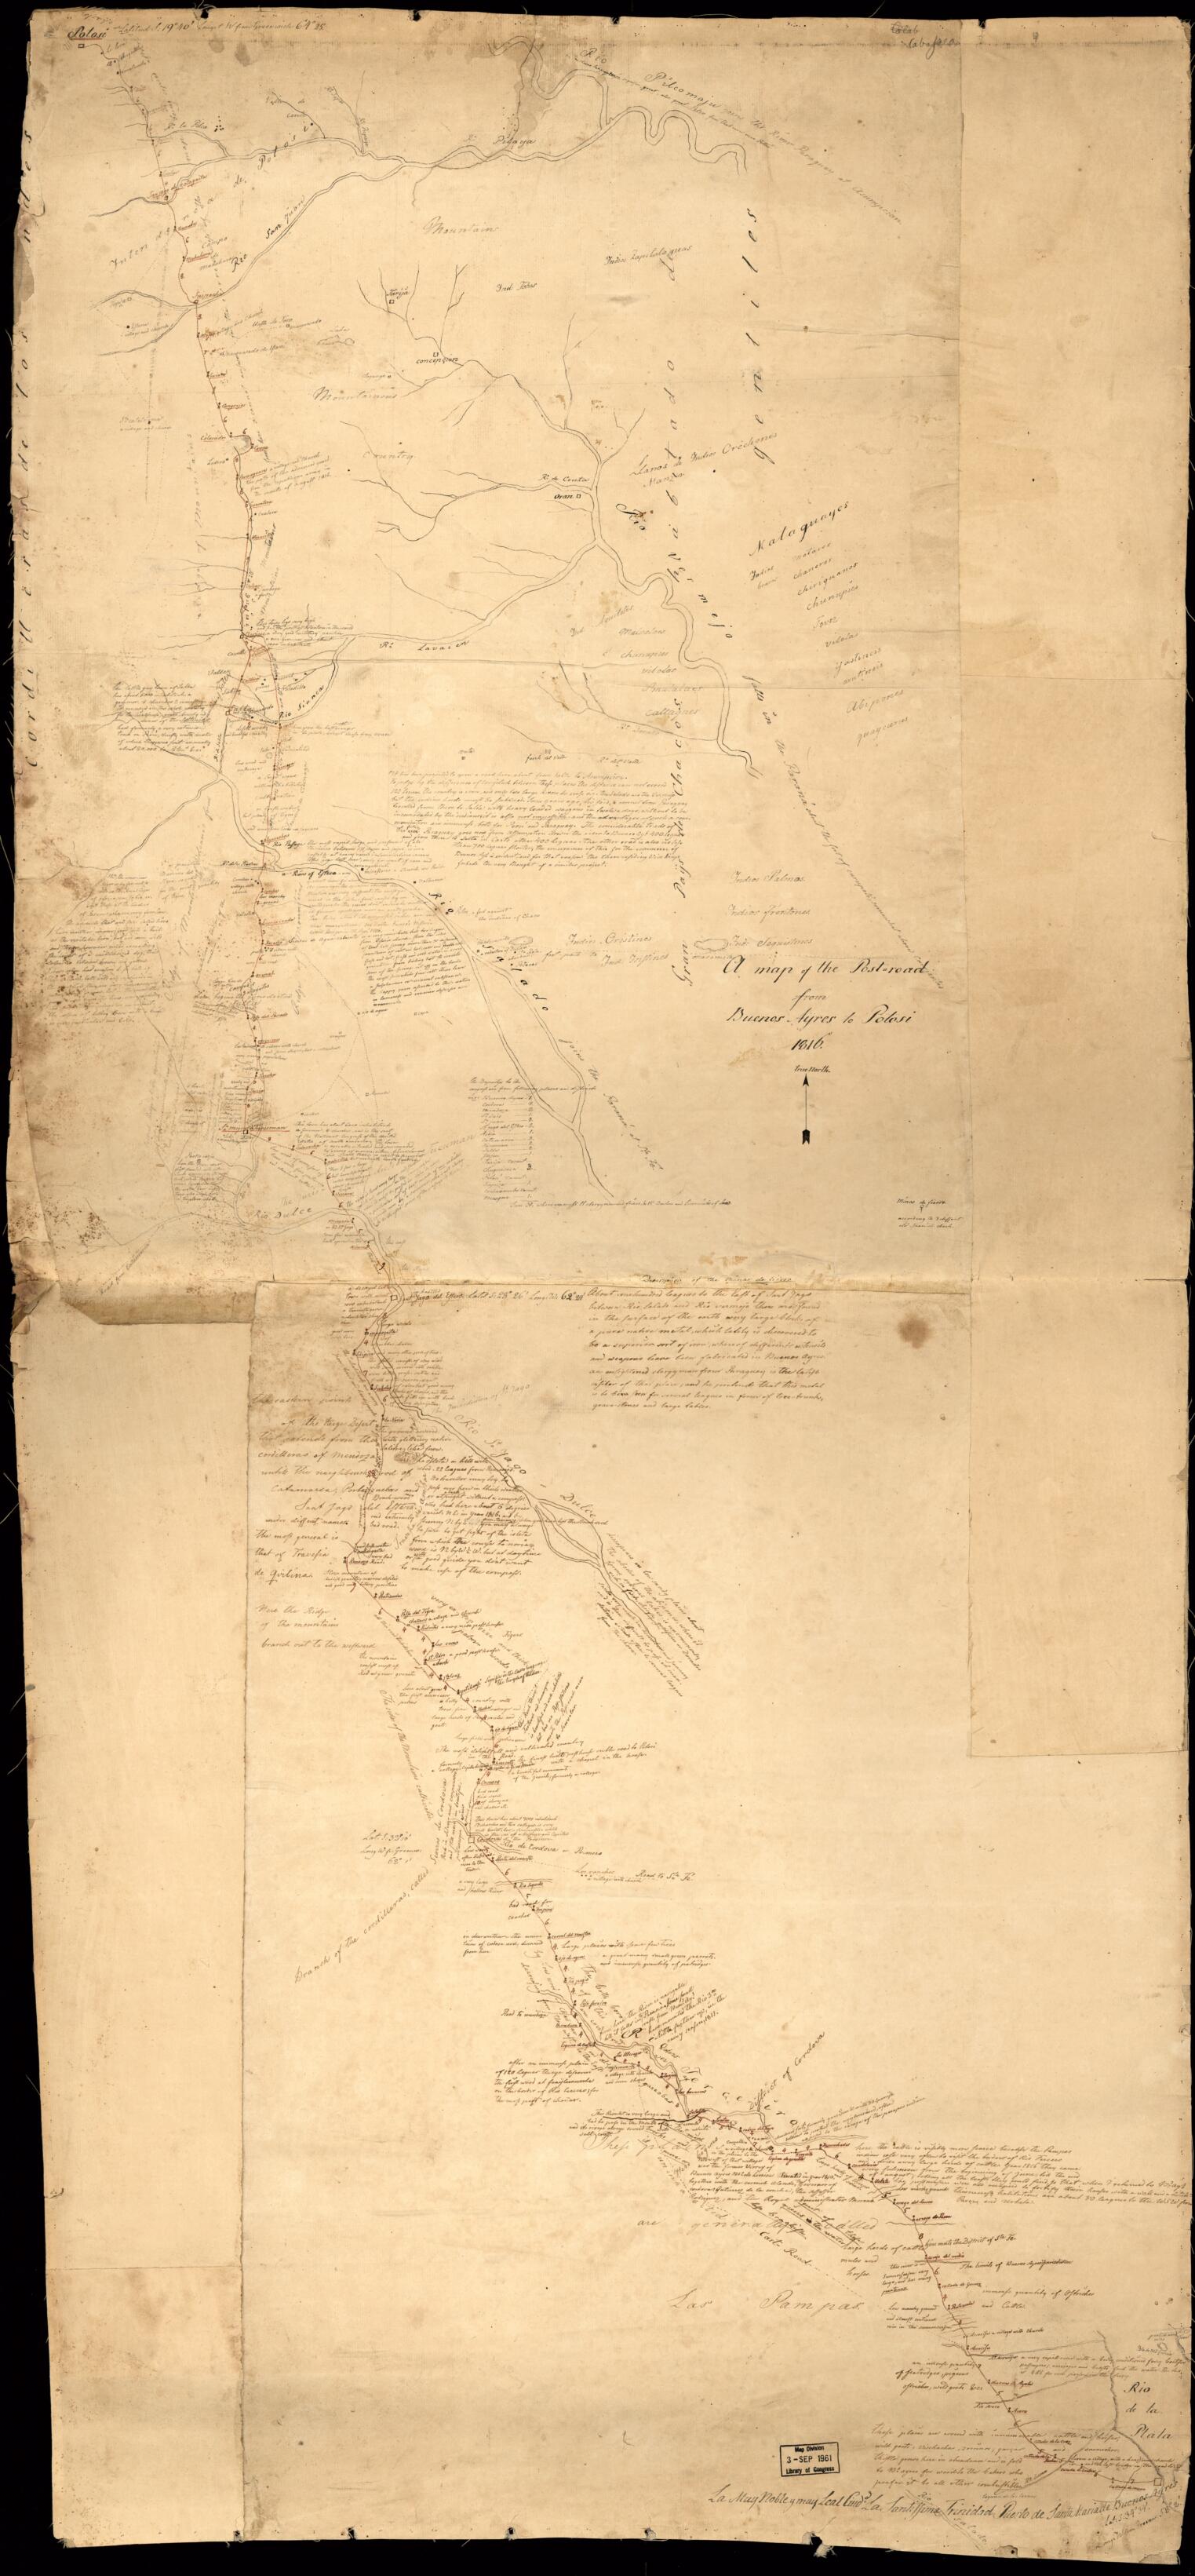 This old map of Road from Buenos Ayres sic to Potosi. (Map of the Post Road from Buenos Aires to Potosi) from 1816 was created by  in 1816